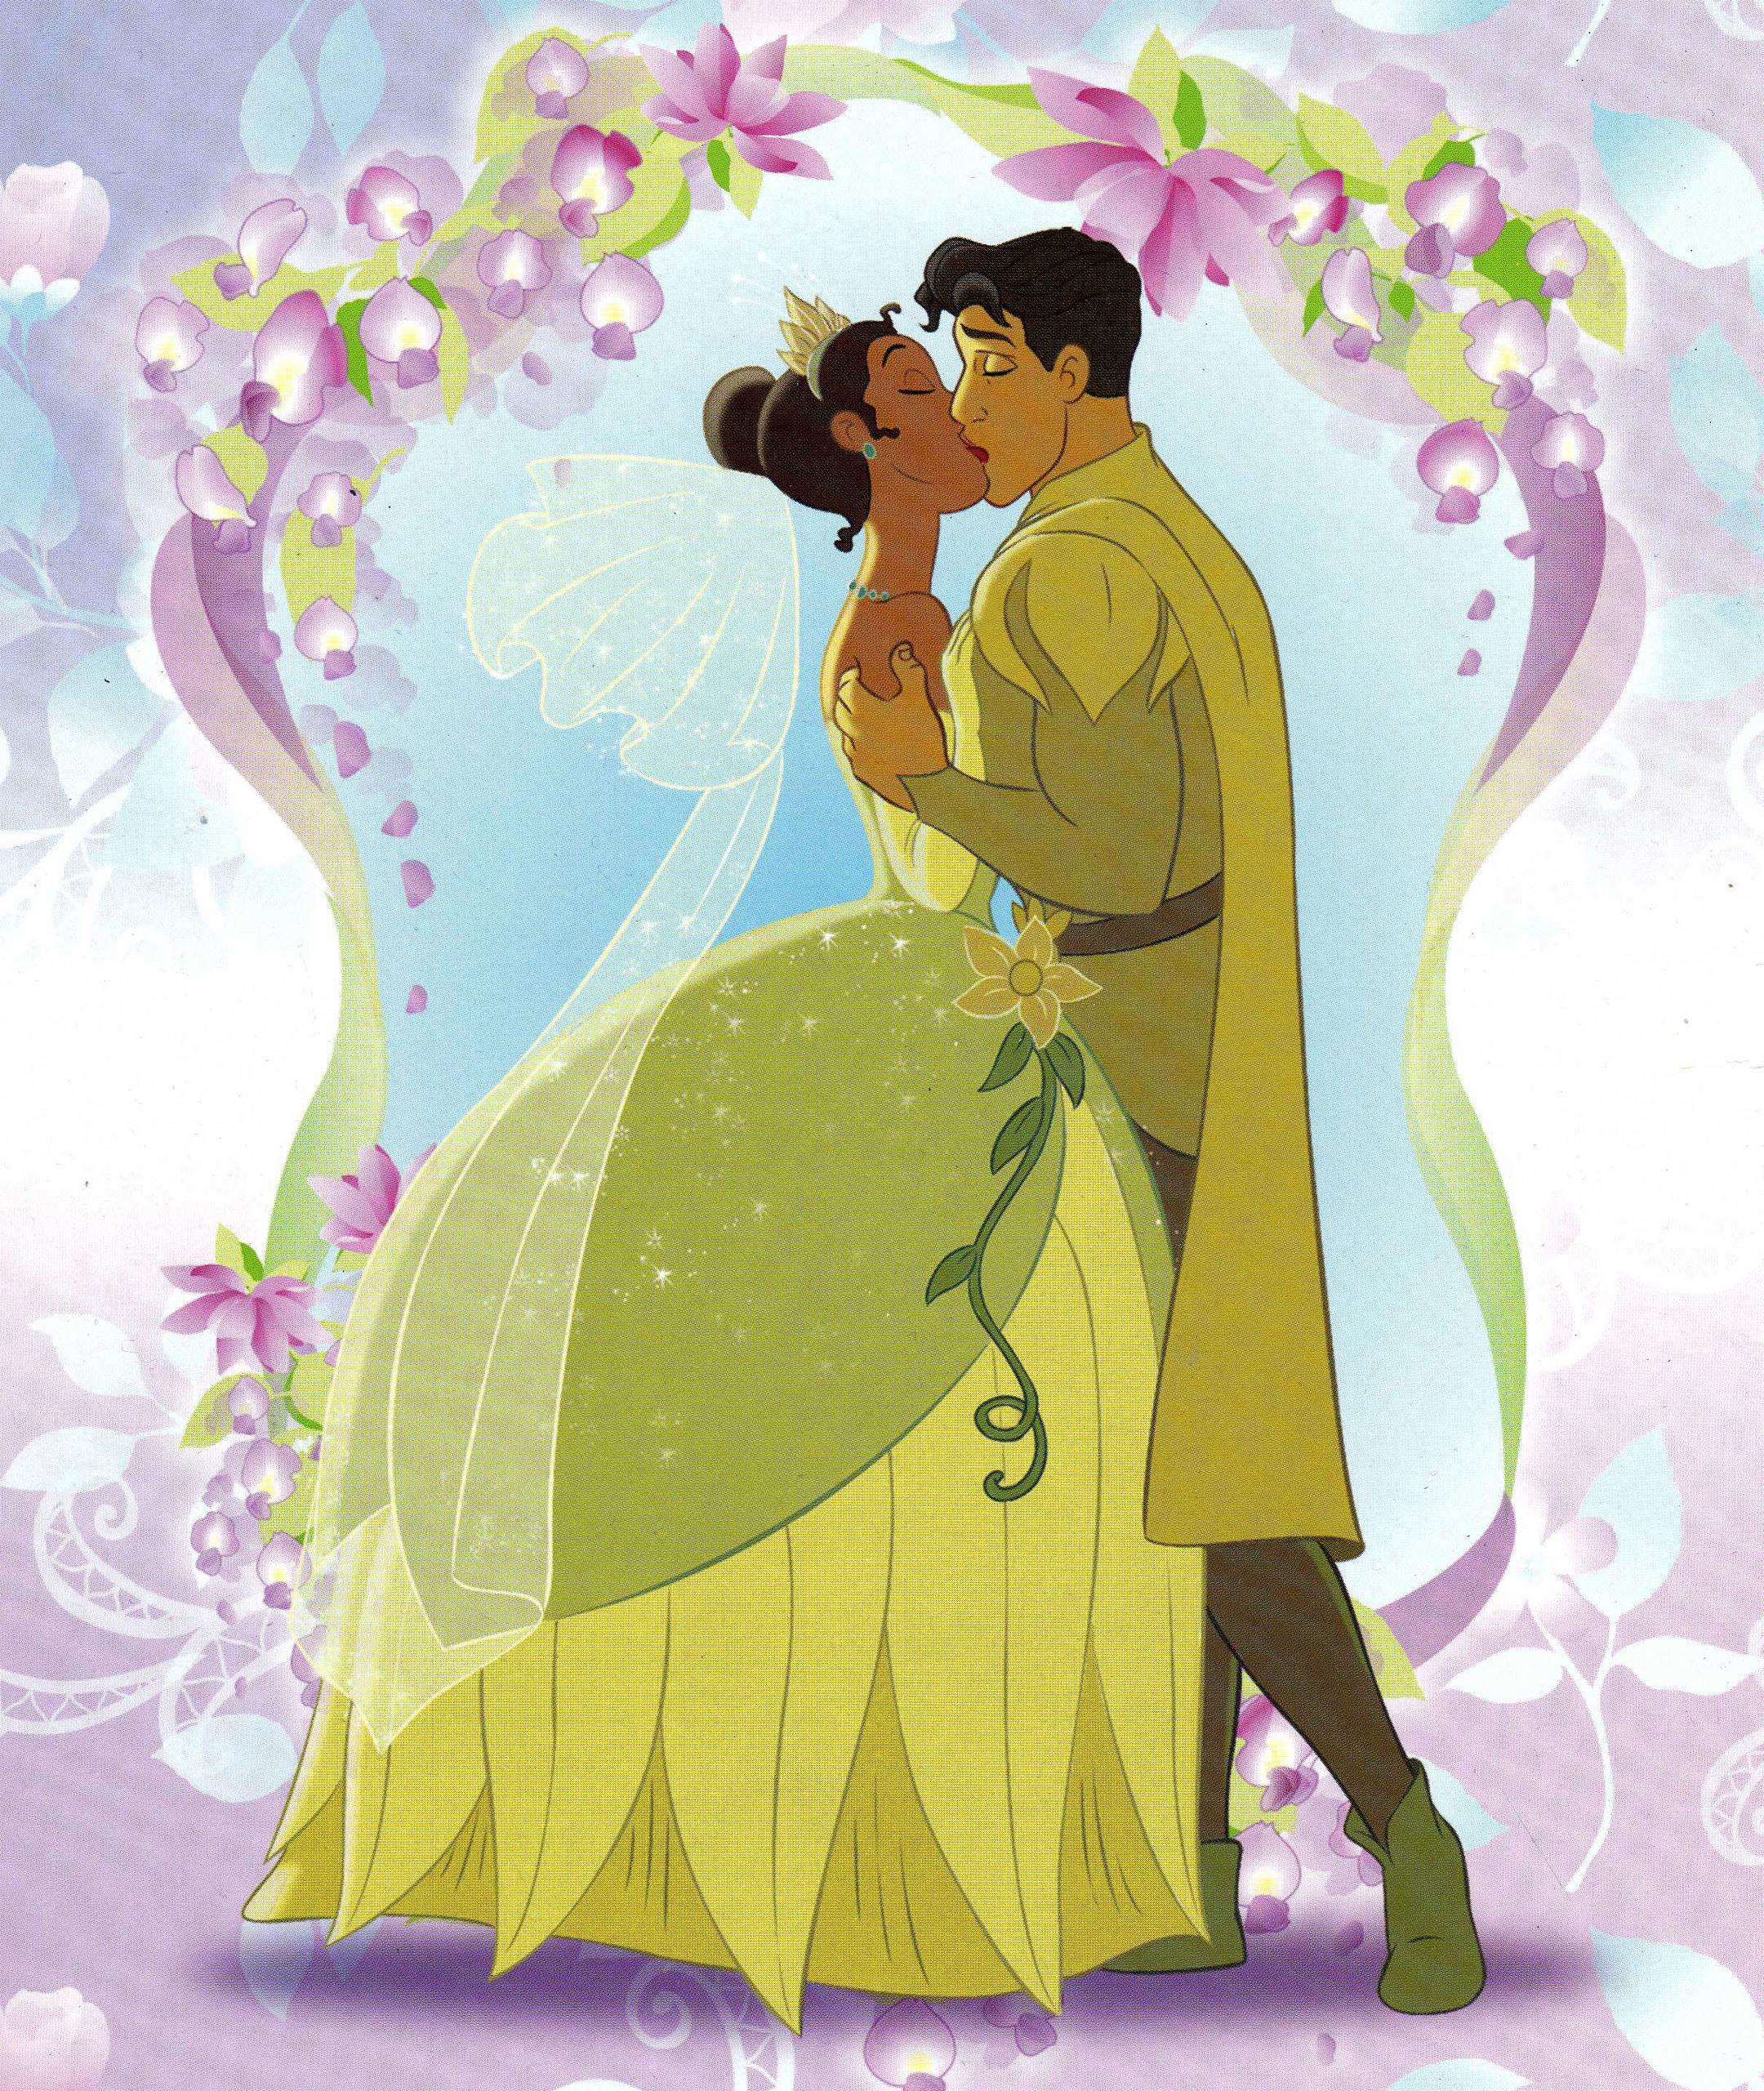 The Princess and the Frog Wallpaper High Quality